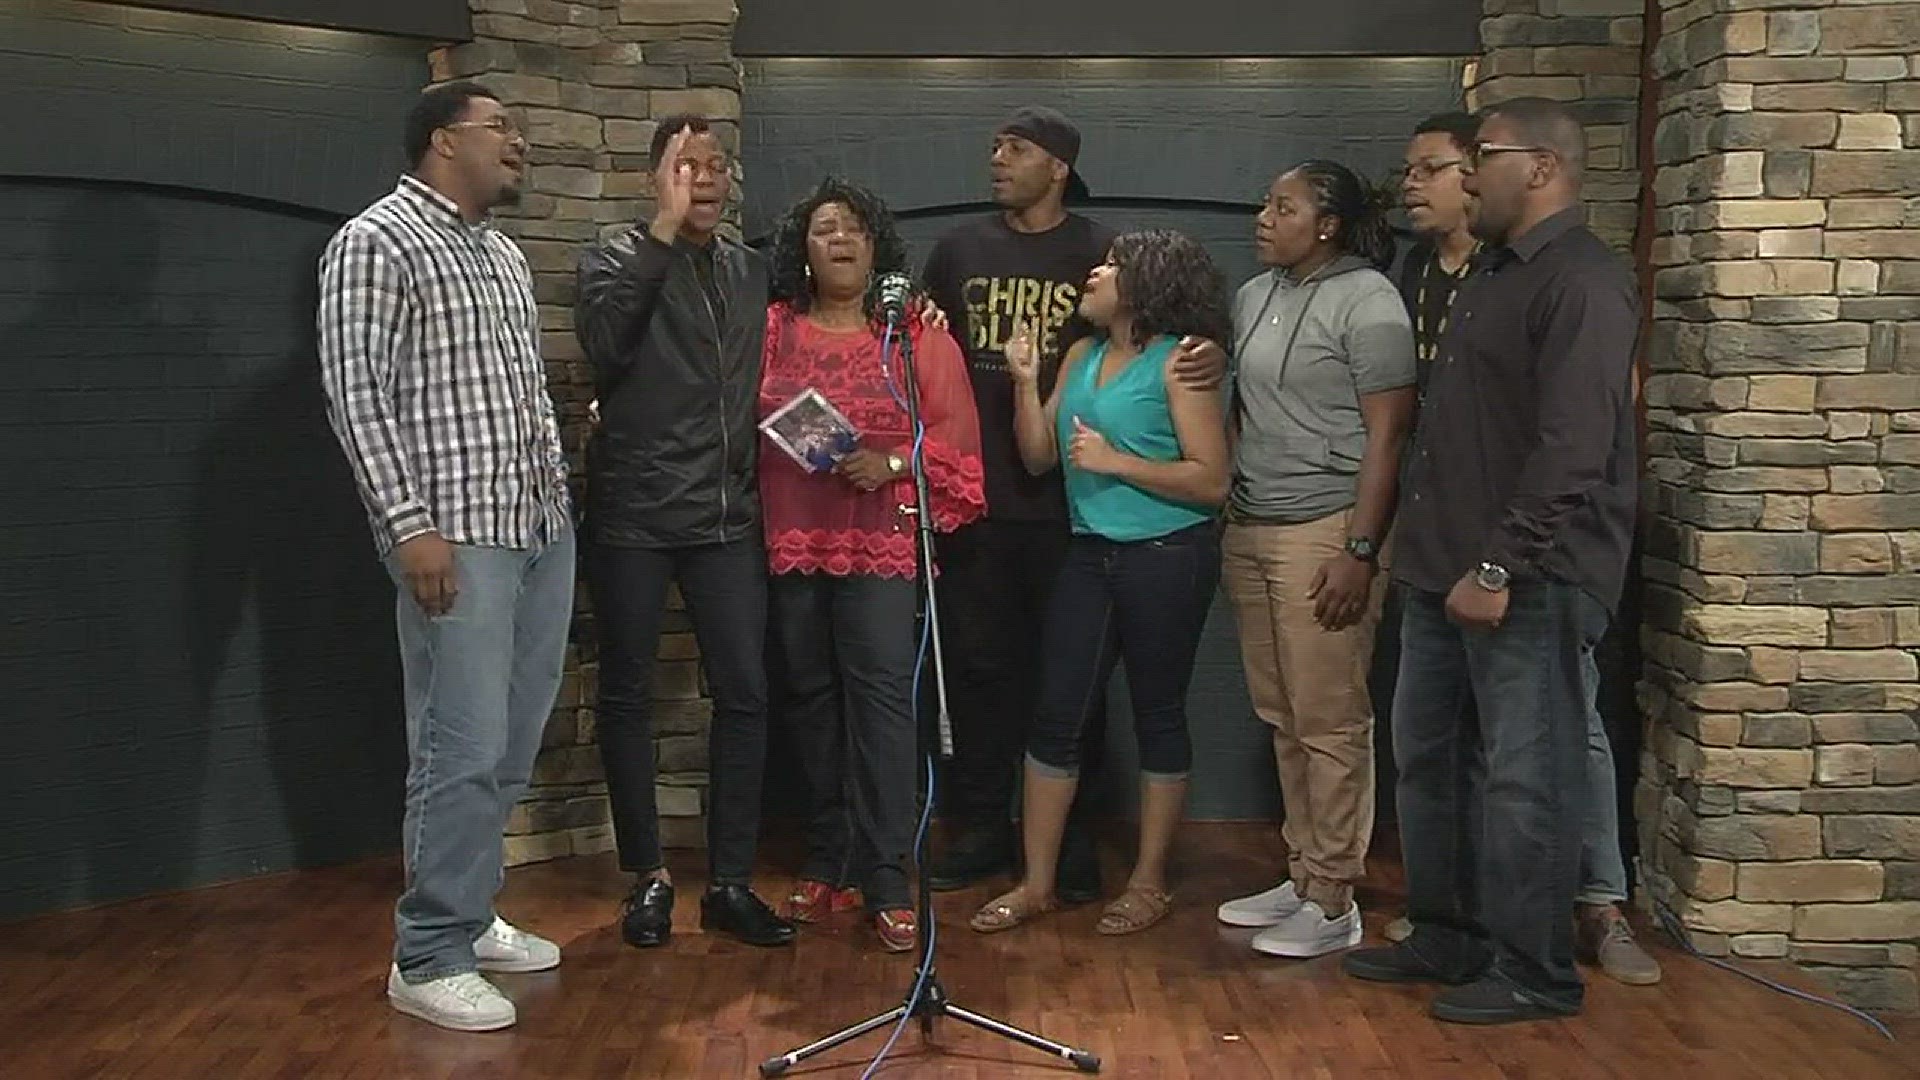 Voice winner Chris Blue and his family sing "We Have Come This Far by Faith."  Chris got his start singing in a gospel group with his family and remains grounded in his faith.